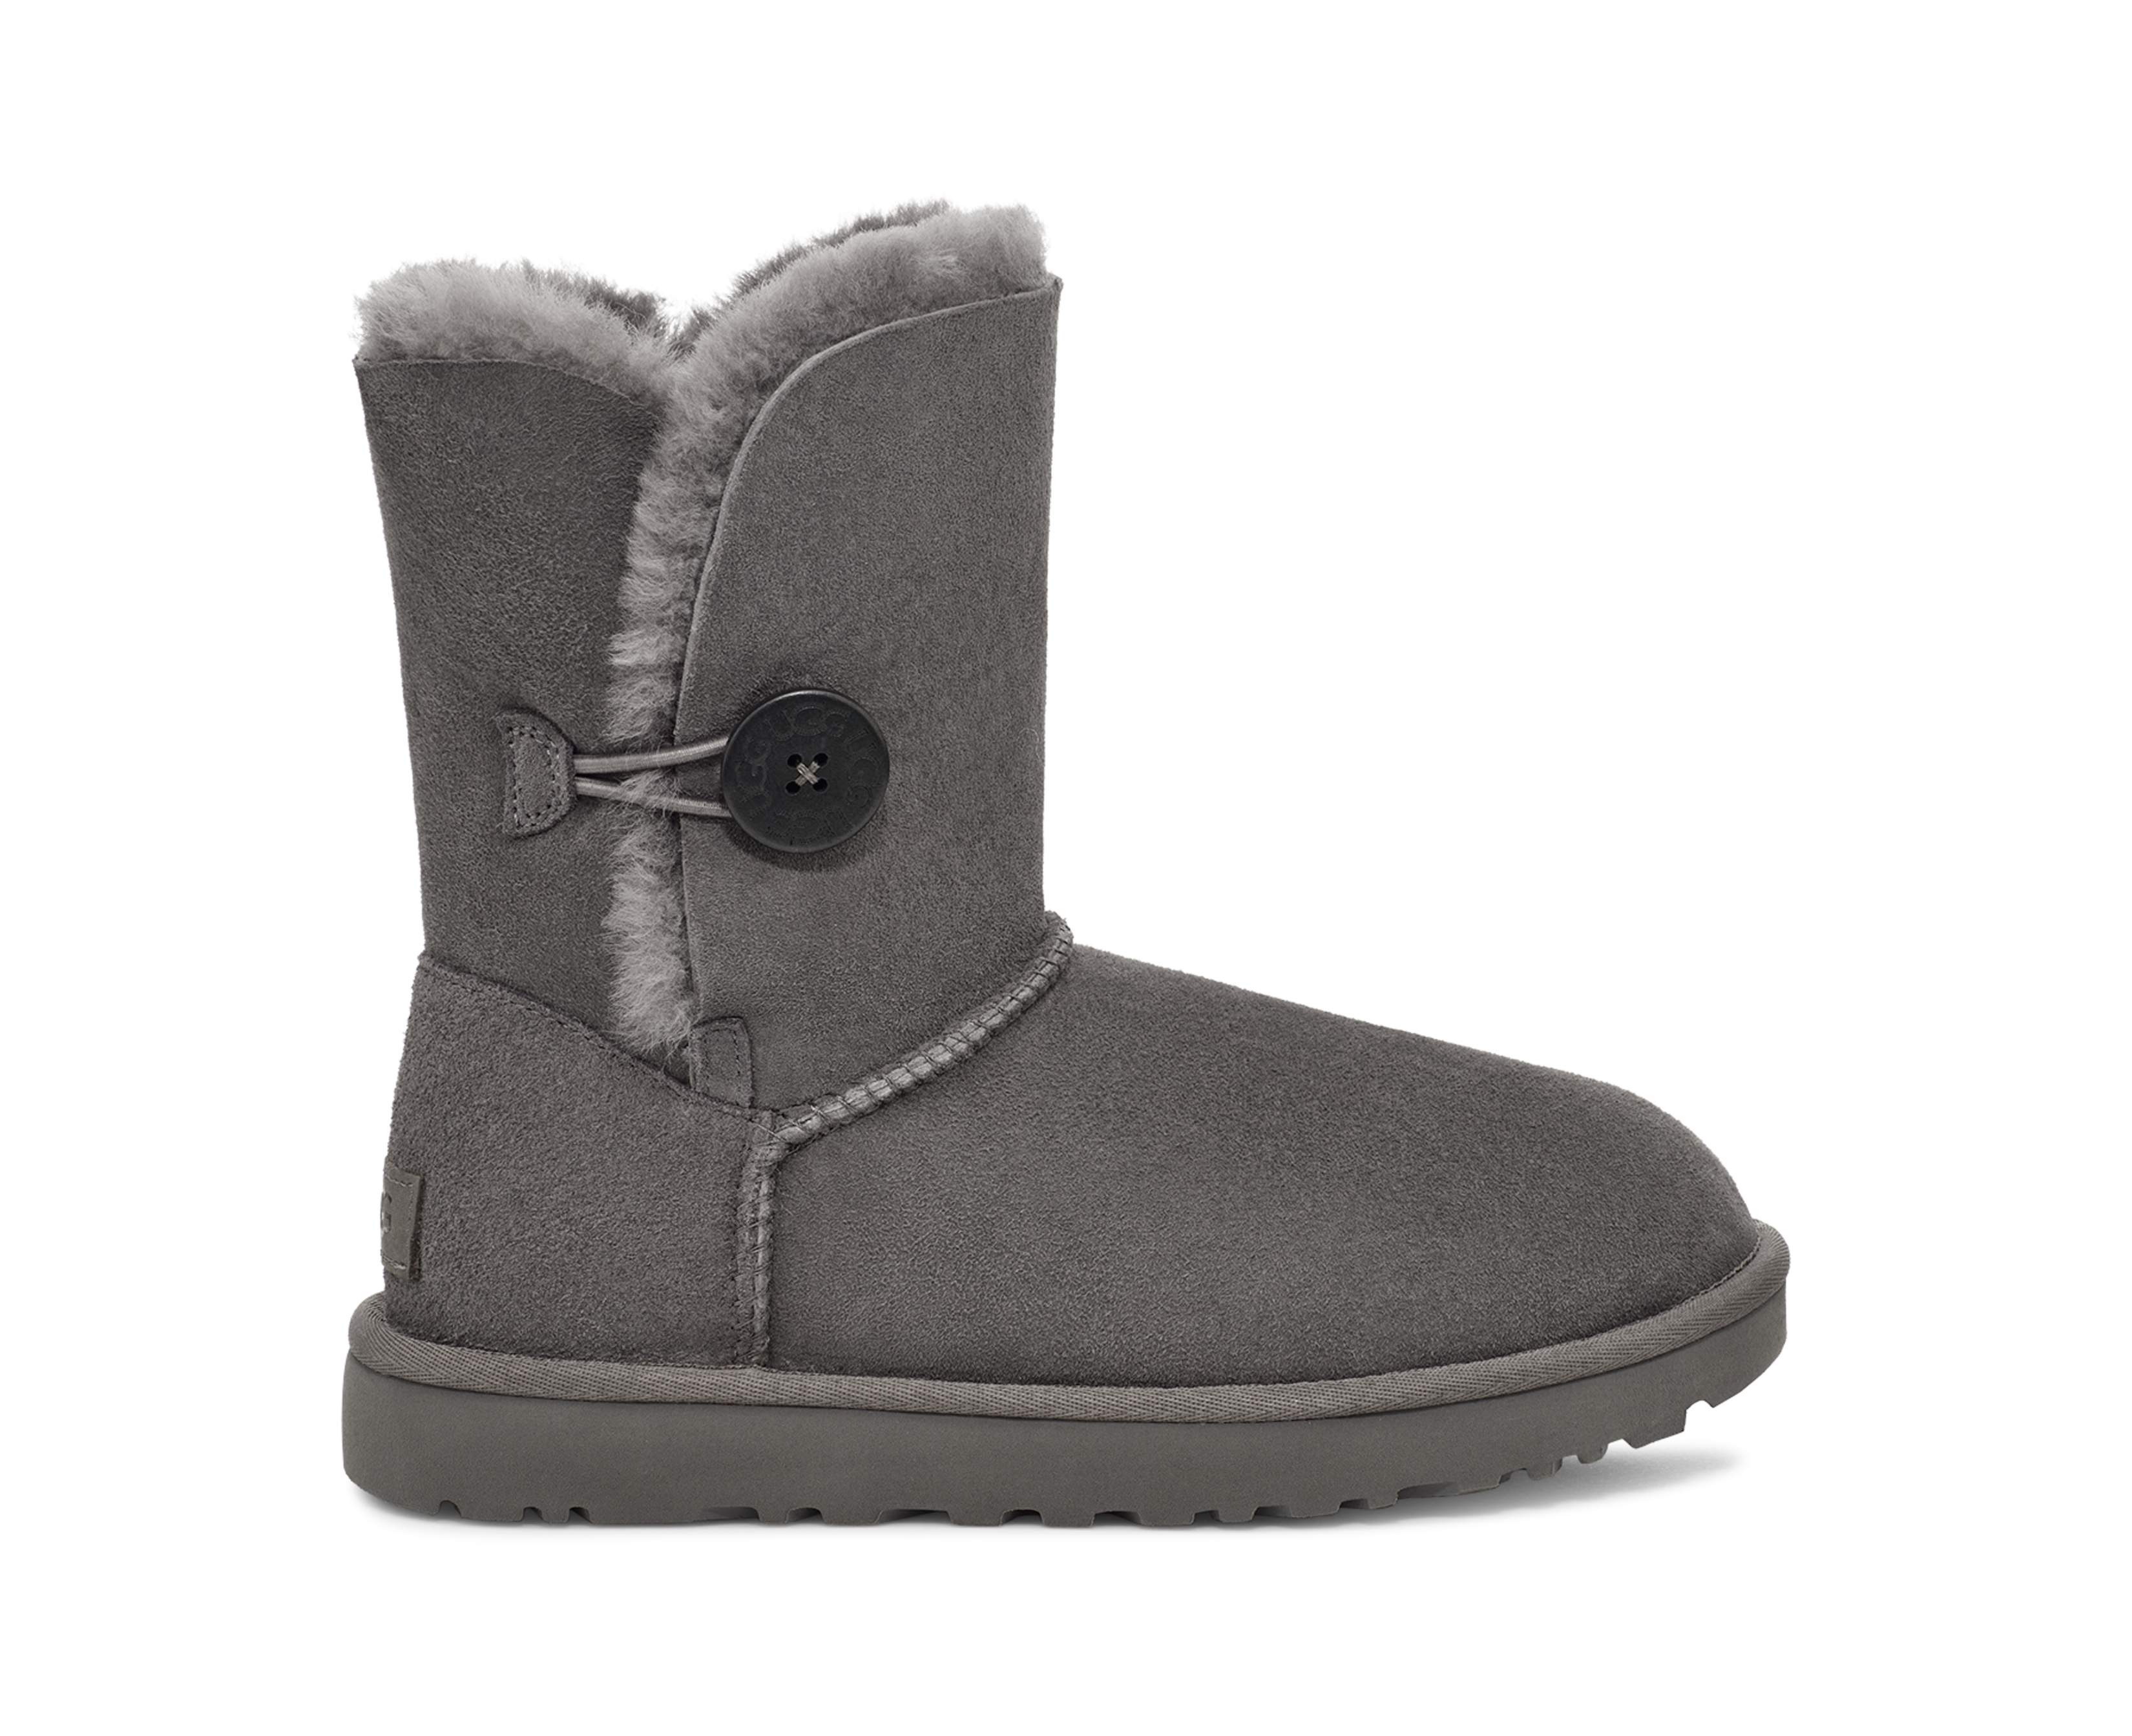 Classic Bailey Boots with Buttons | UGG® Official